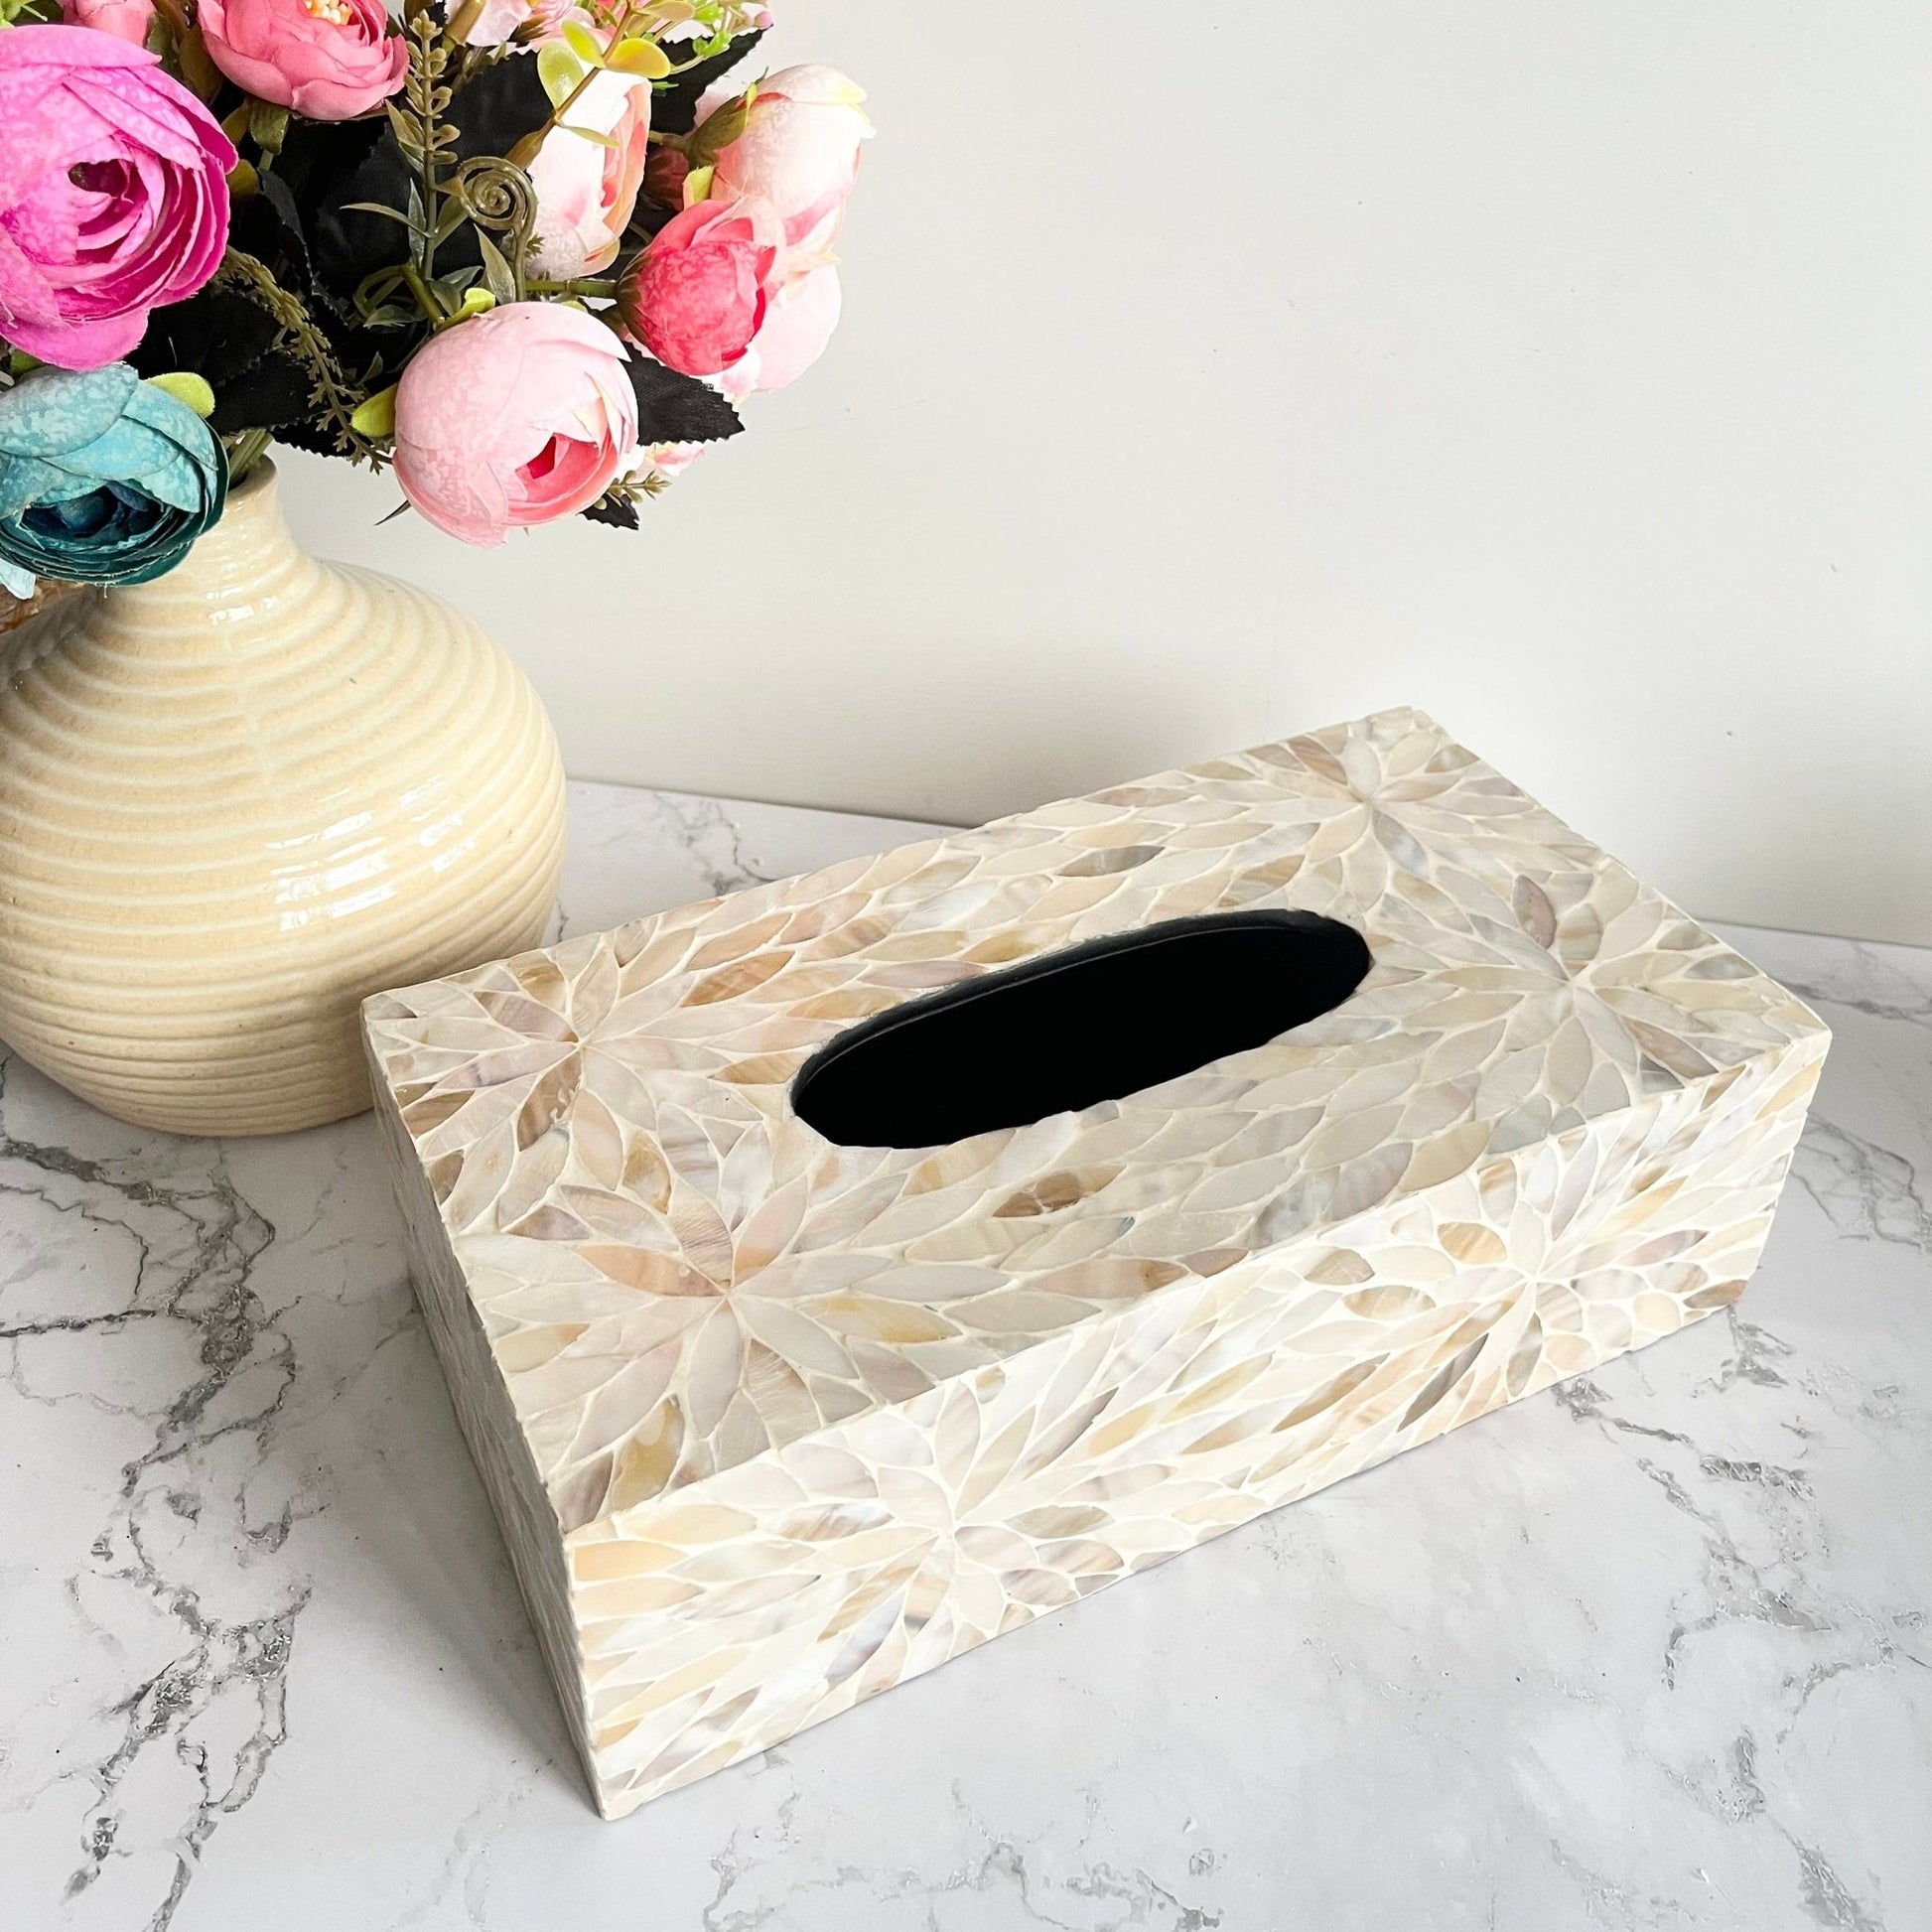 Mother of pearl inlay rectangle tissue box holder with floral pattern vintage stylePremiumWoodArt